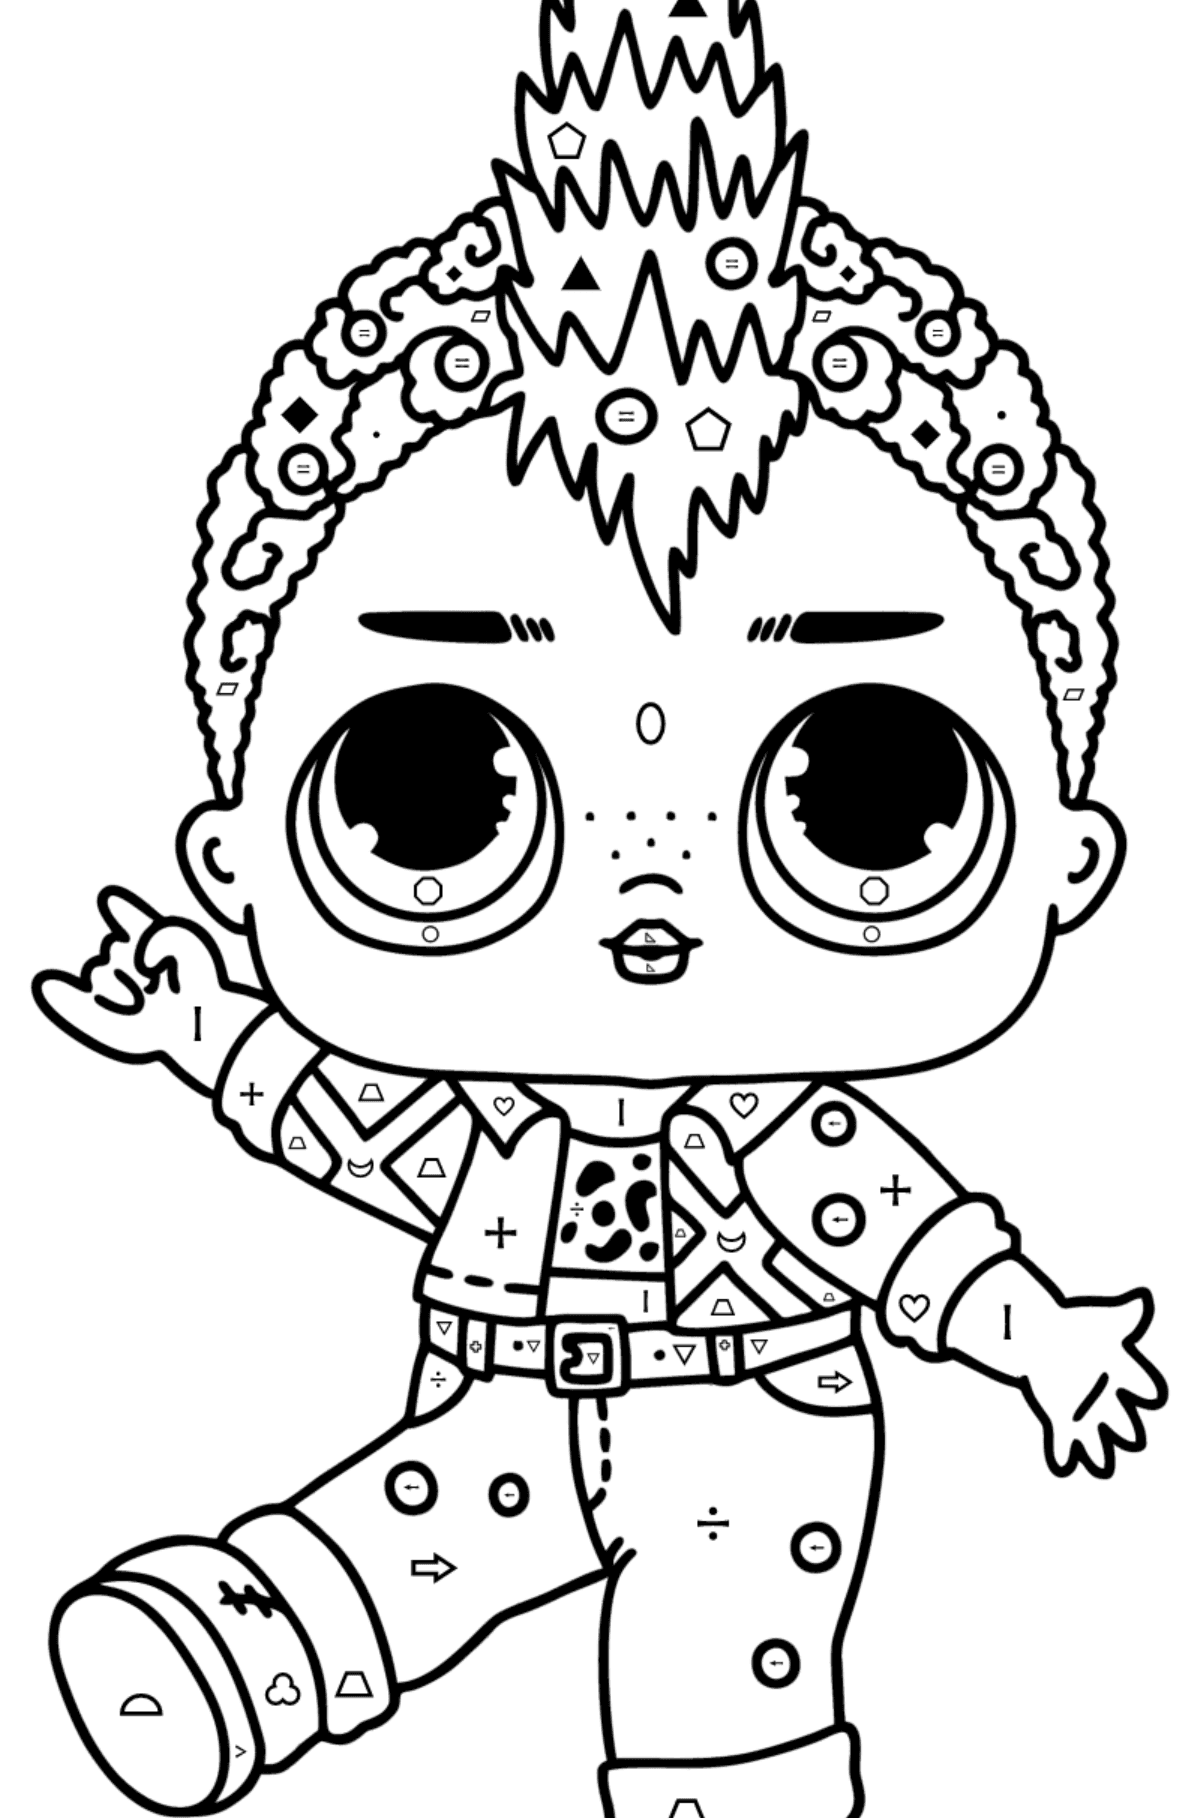 Colouring page LOL Surprise Punk Boi - Coloring by Symbols and Geometric Shapes for Kids